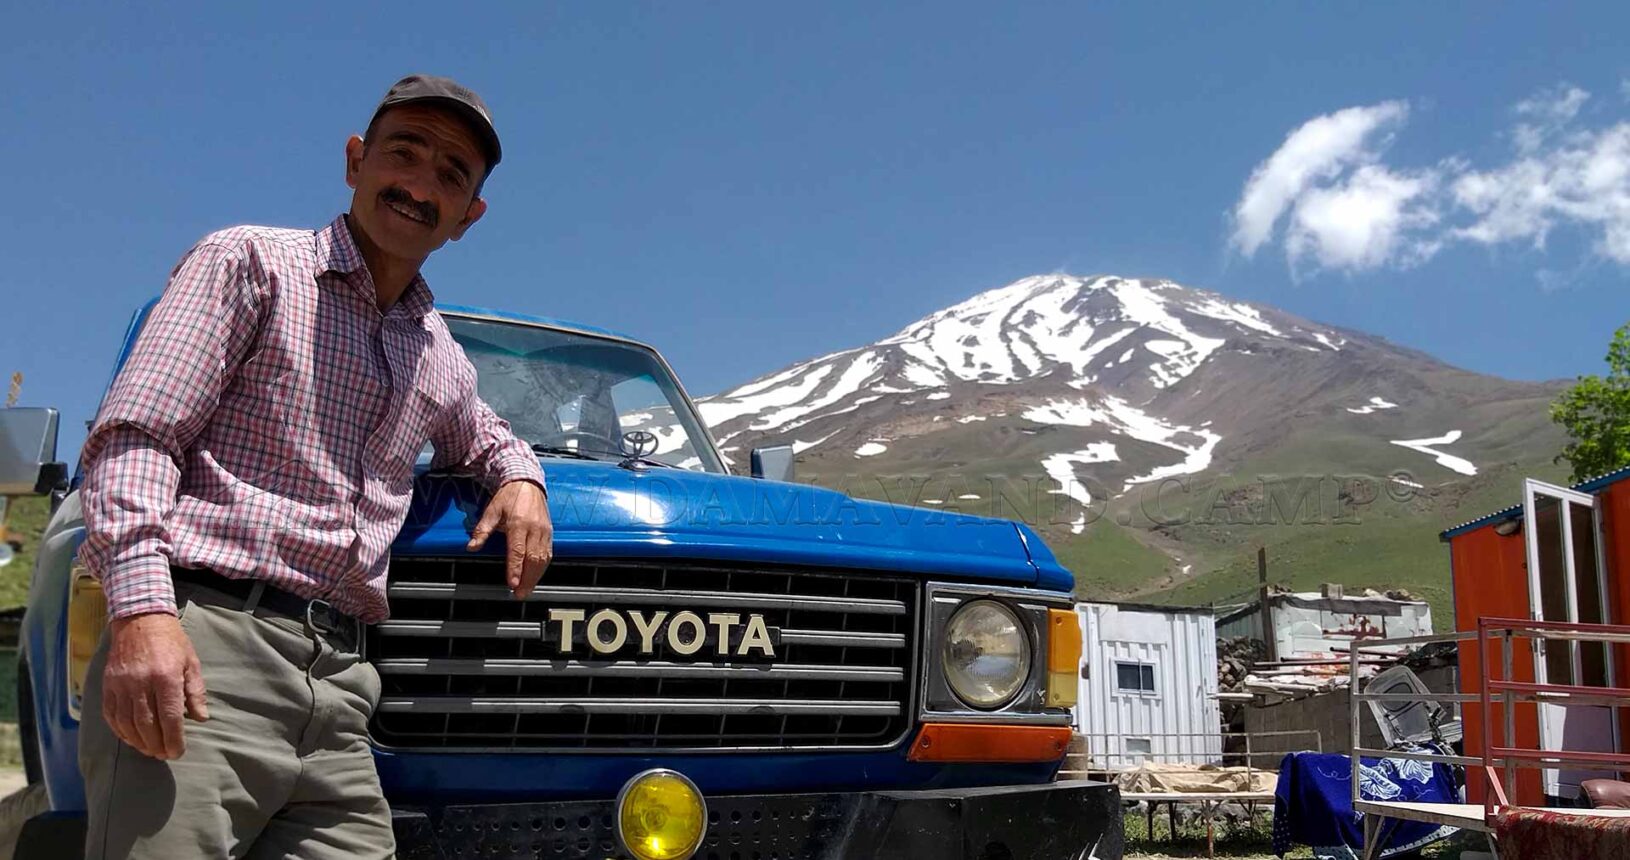 Mr. Faramarzpour is with his car at Camp 2, with Mount Damavand visible in the background.